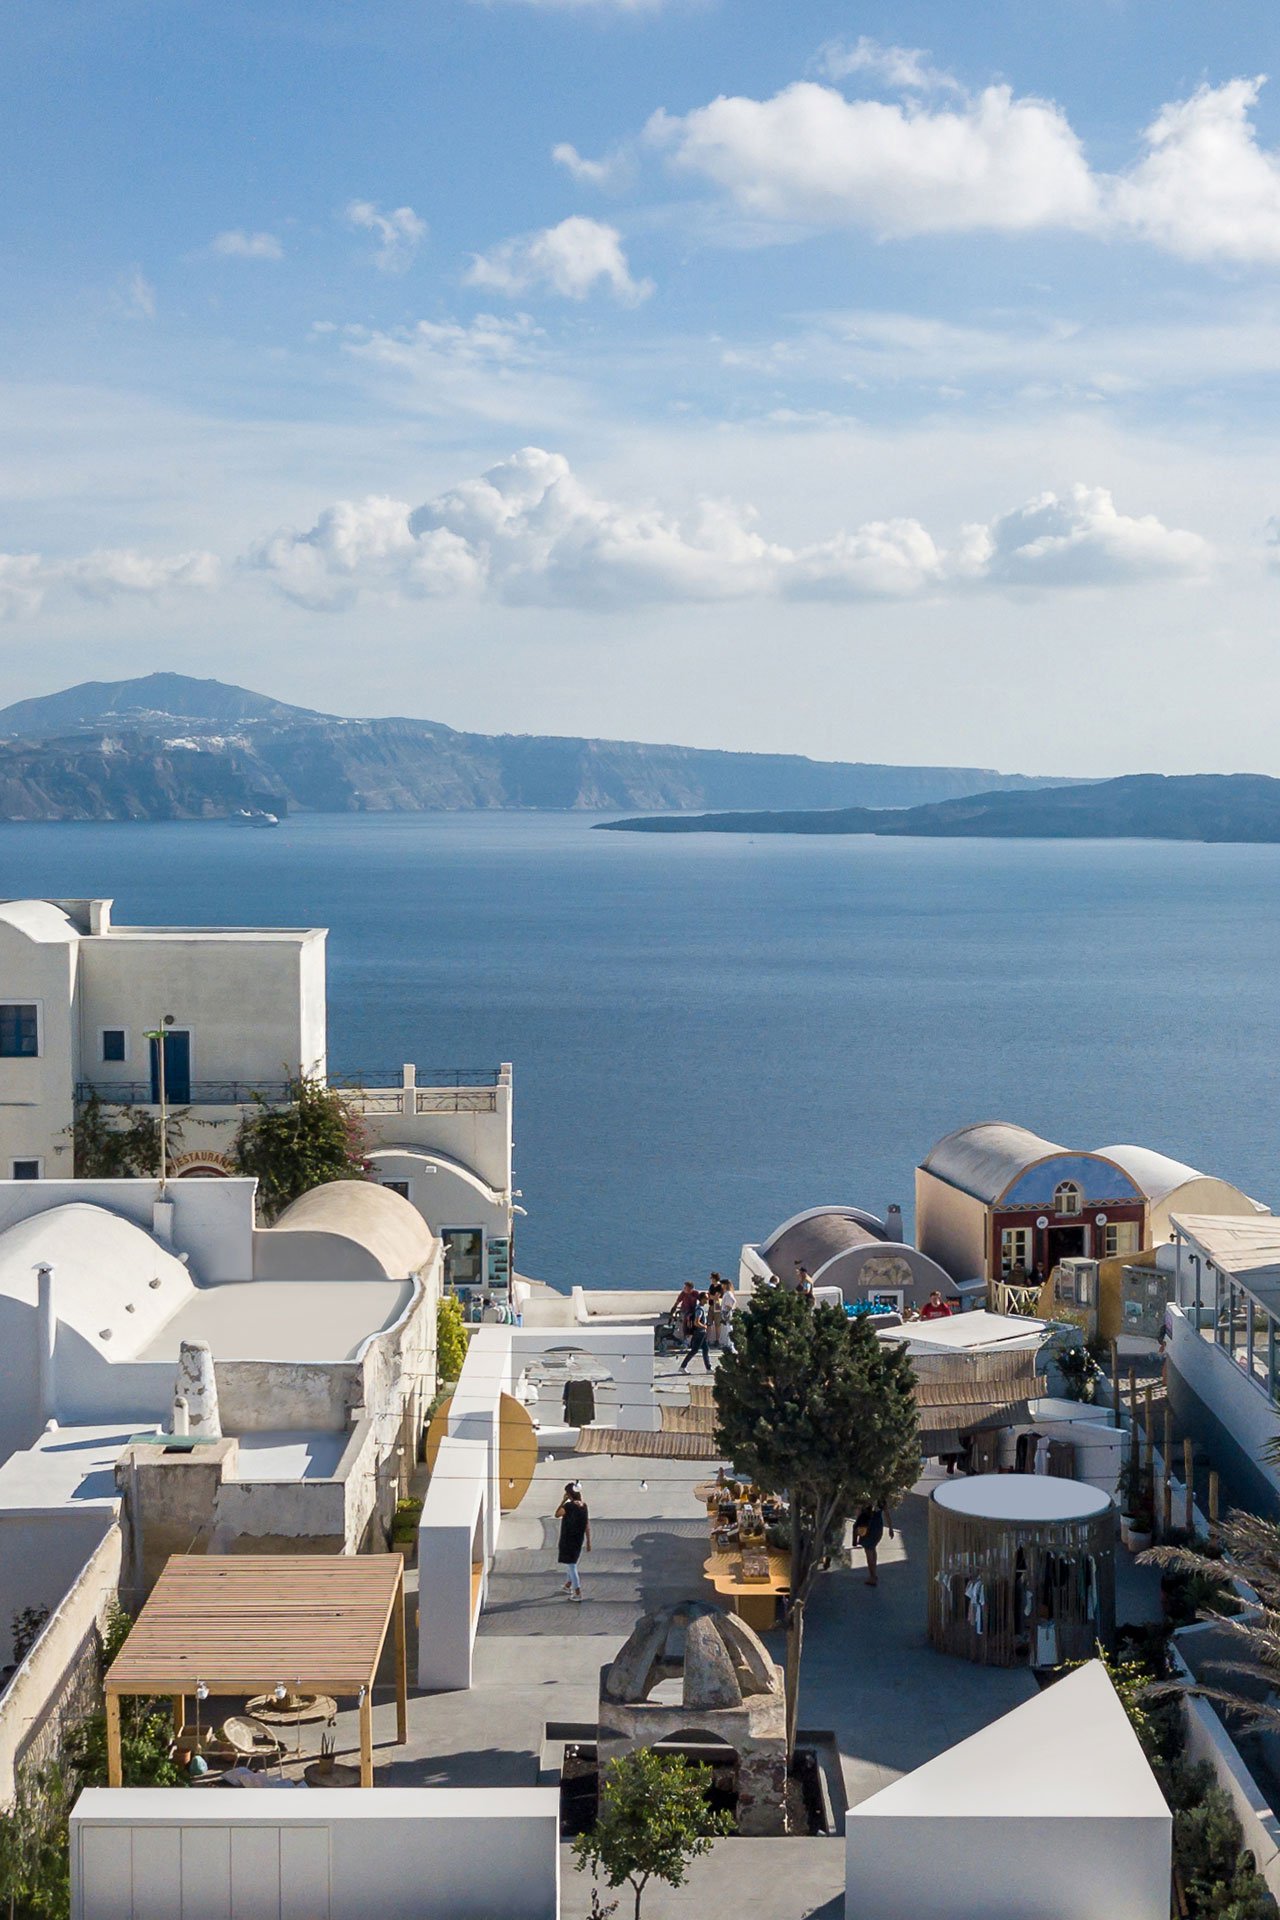 Cycladic Folklore Meets Contemporary Modernism at the Open Market on Santorini Island-2